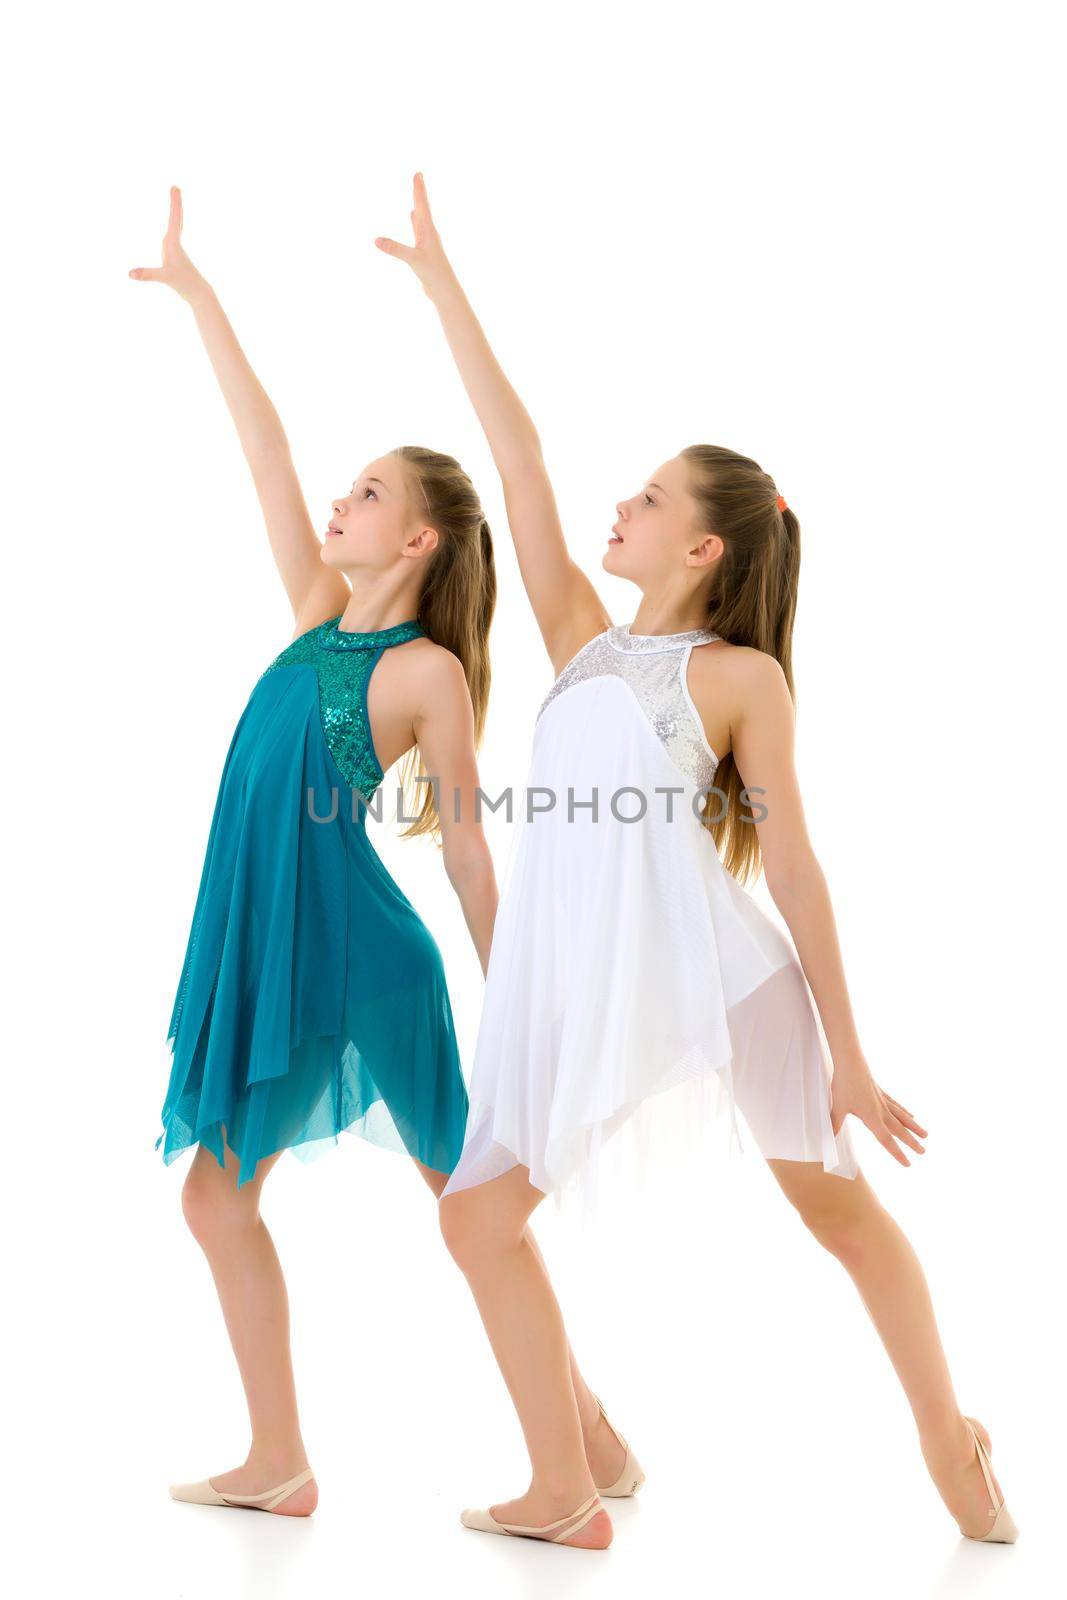 Pretty Girls Dancers Dancing Synchronously in Studio, Two Beautiful Twin Sisters Wearing White and Blue Sport Dresses Performing Together, Two Teenage Girls Posing in Studio Against White Background